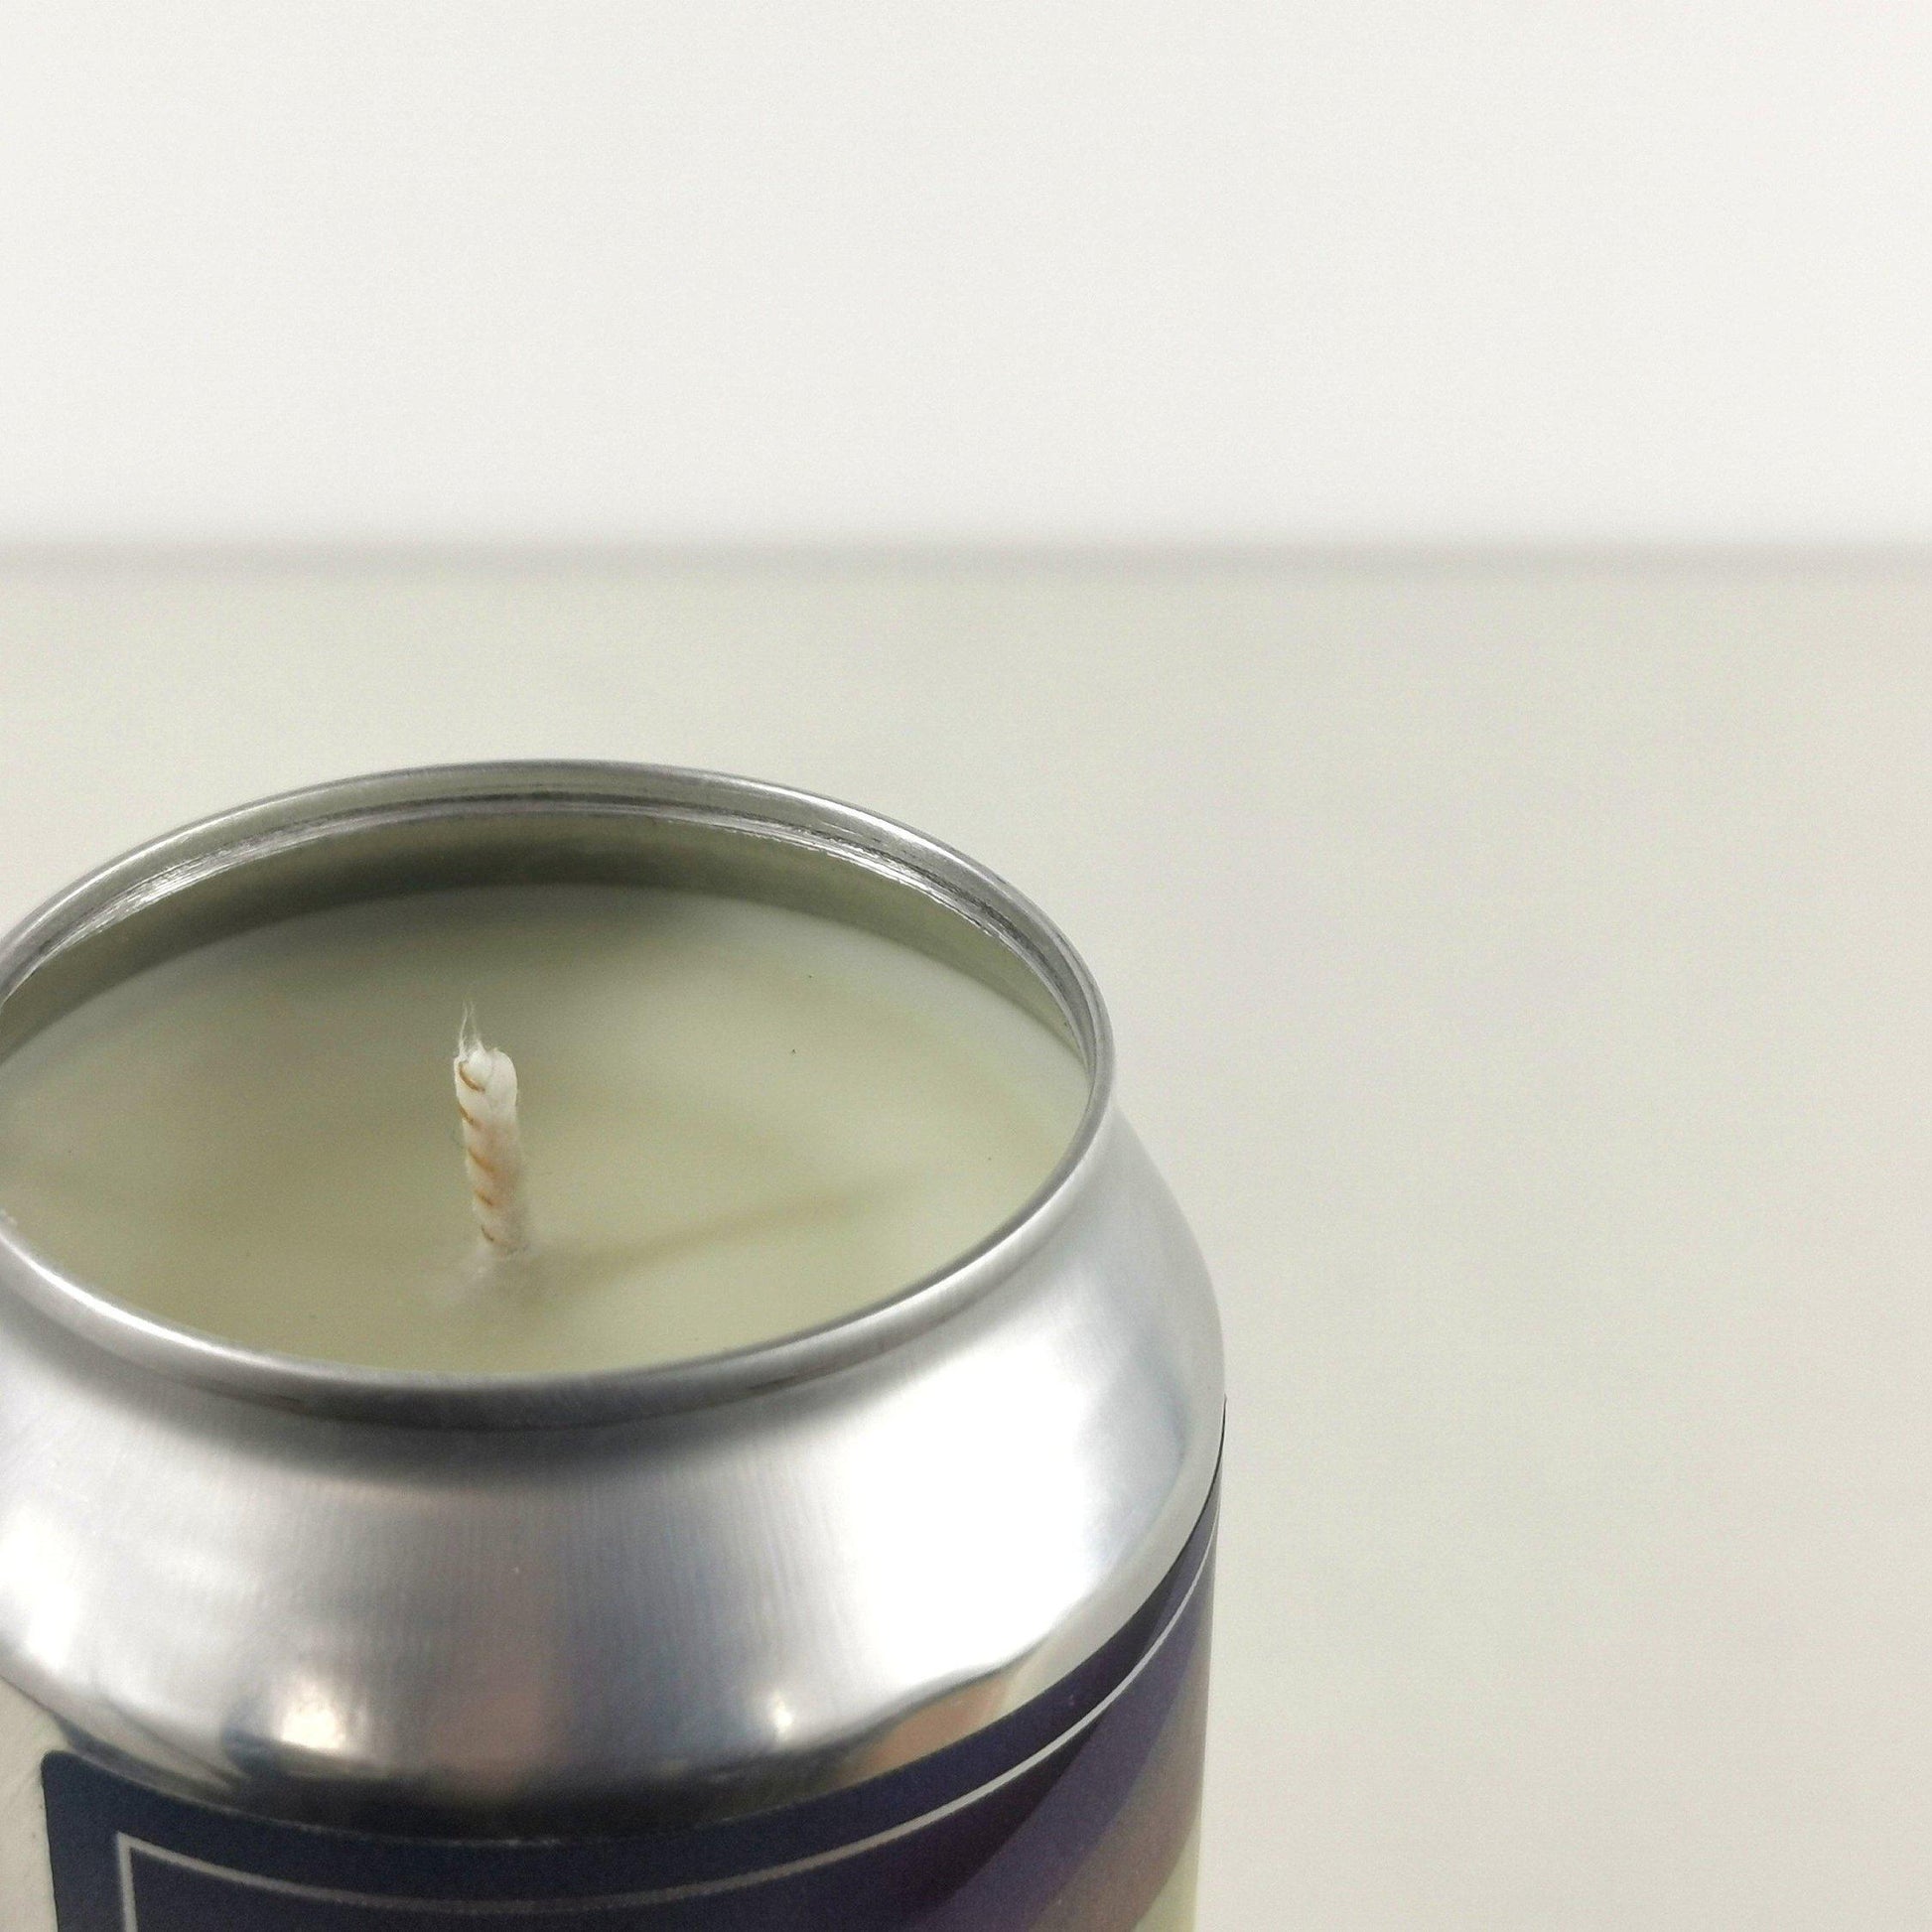 Traverse the Polyverse Craft Beer Can Candle Beer Can Candles Adhock Homeware